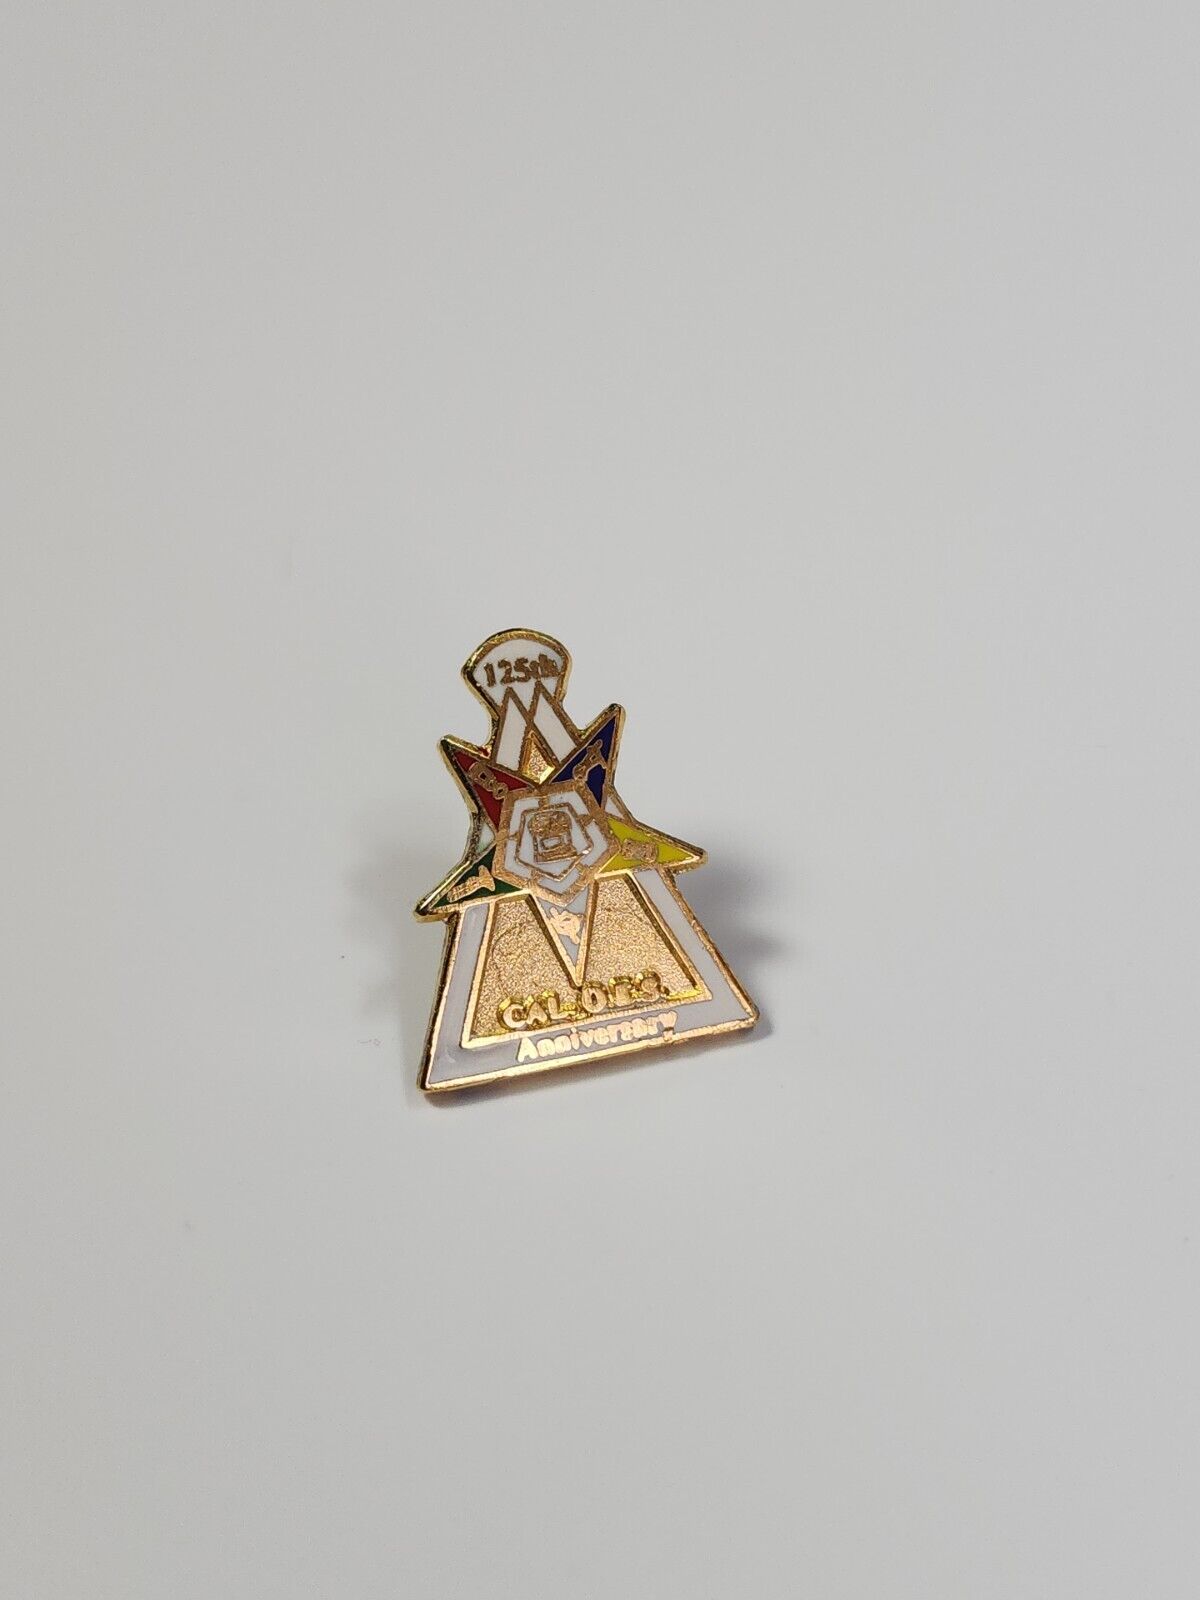 CAL OES 125th Anniversary Lapel Pin California Order of the Eastern Star